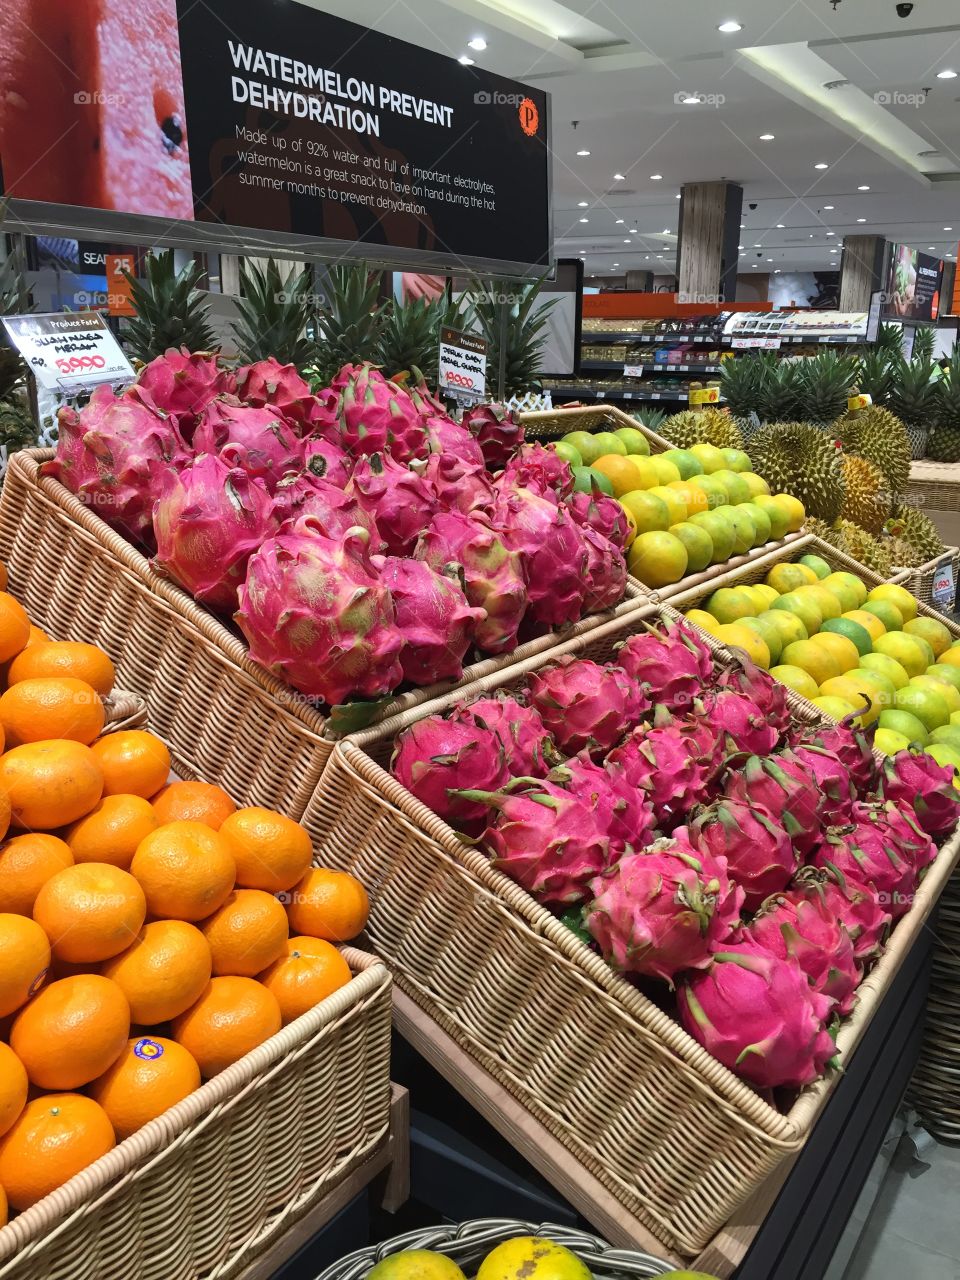 various kinds of fruit on display such as oranges, dragon fruit etc.